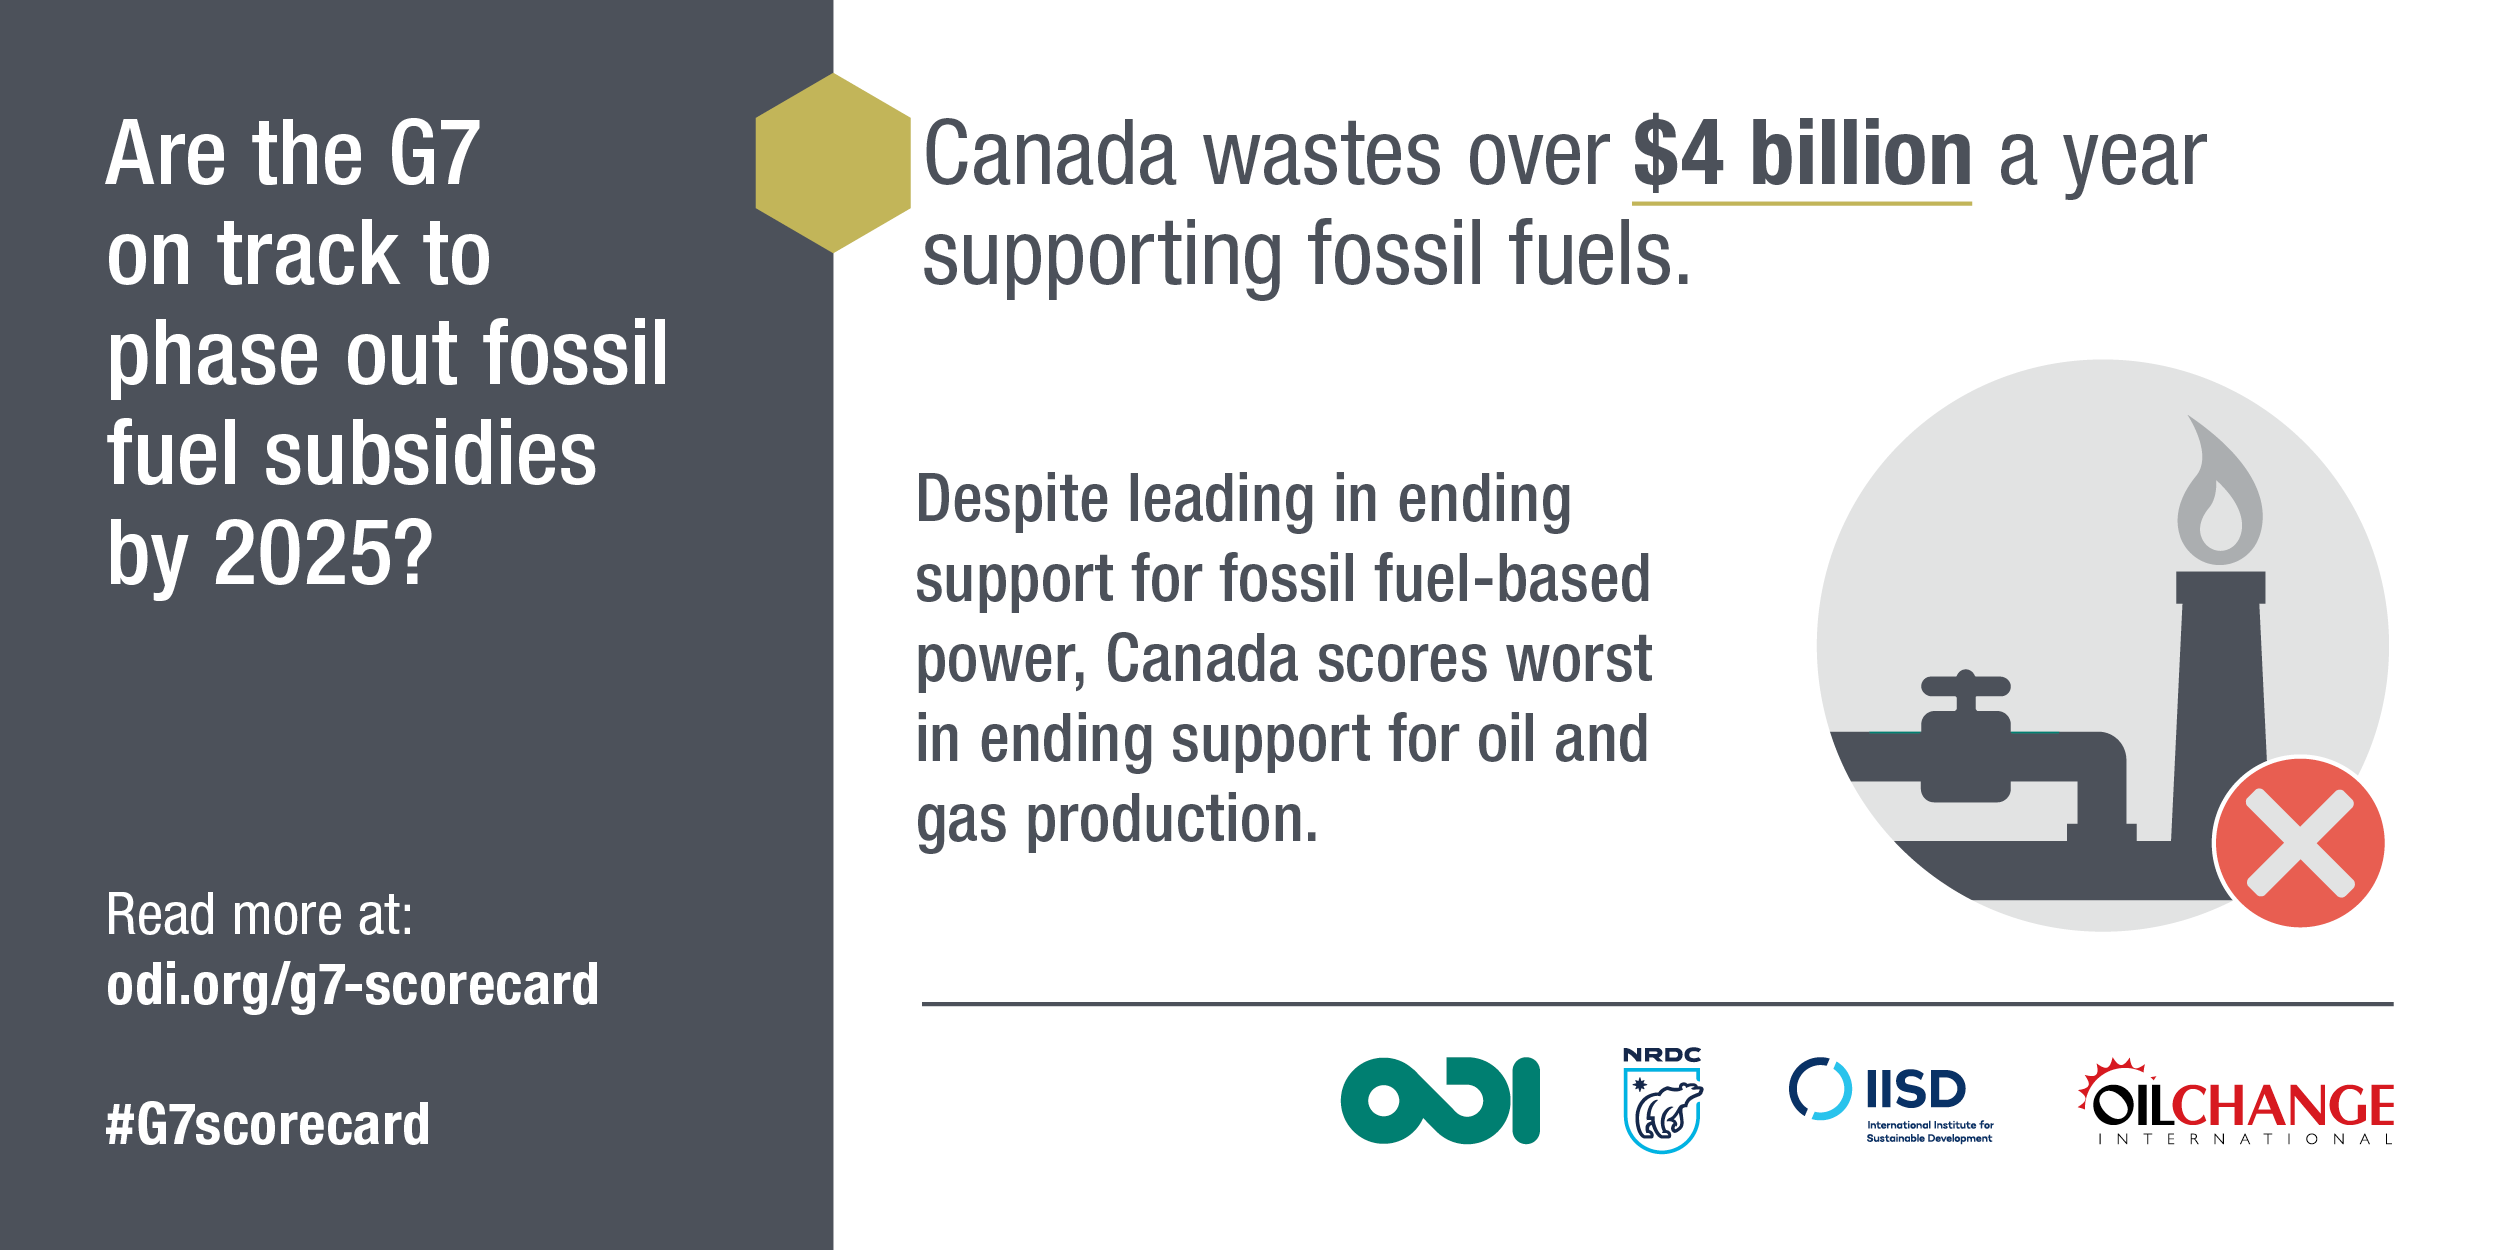 Canada wastes over $4 billion a year supporting fossil fuels. Image: ODI